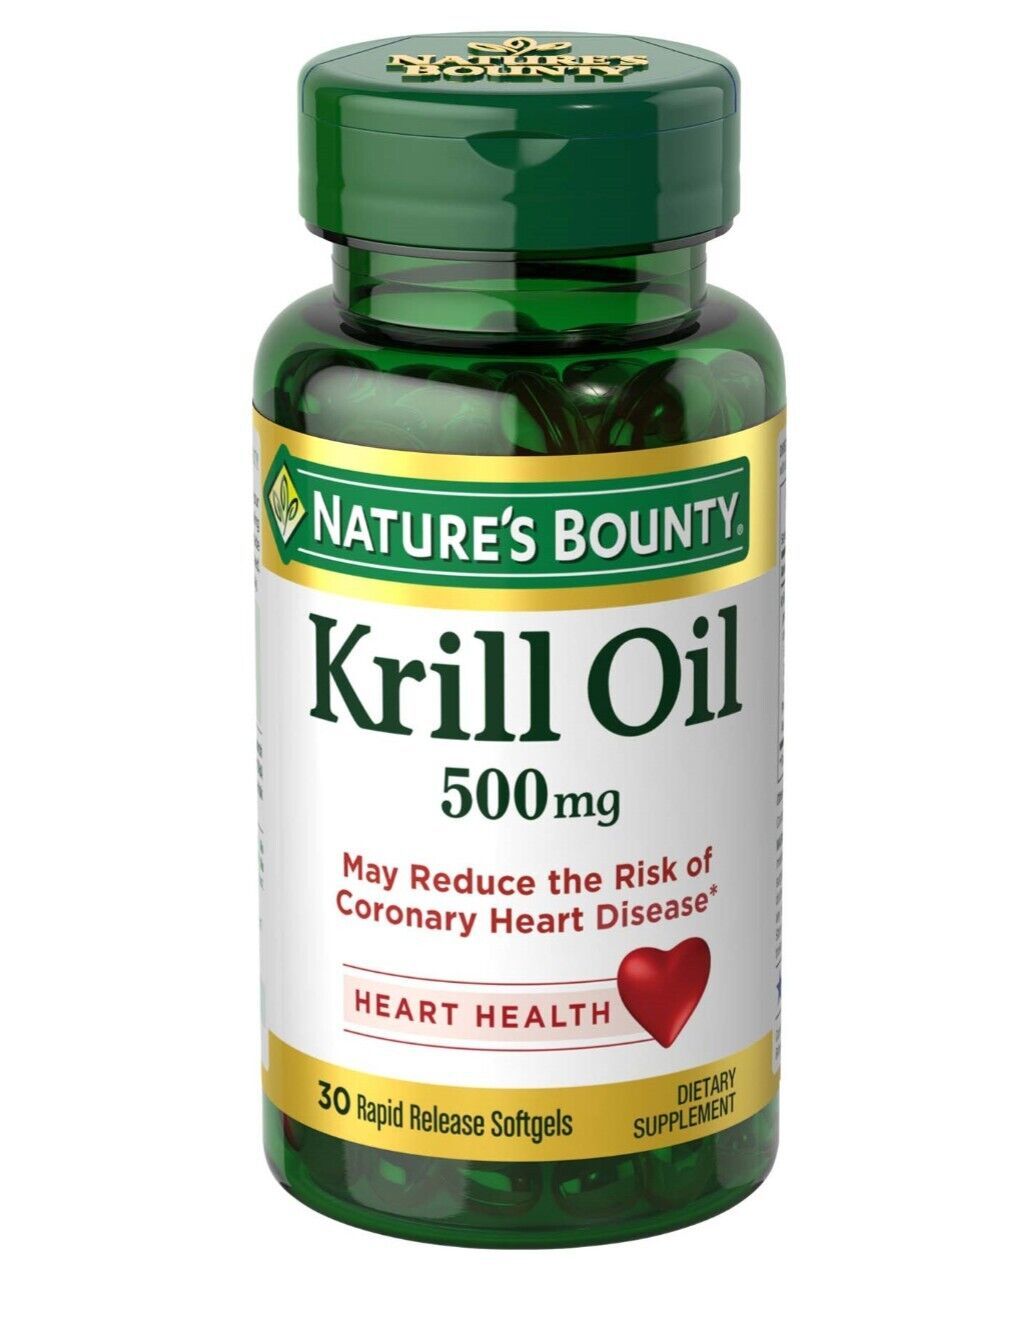 Nature's Bounty Red Krill Oil 30 Softgels 500 mg Free Ship Discount on 2 or more - $20.85